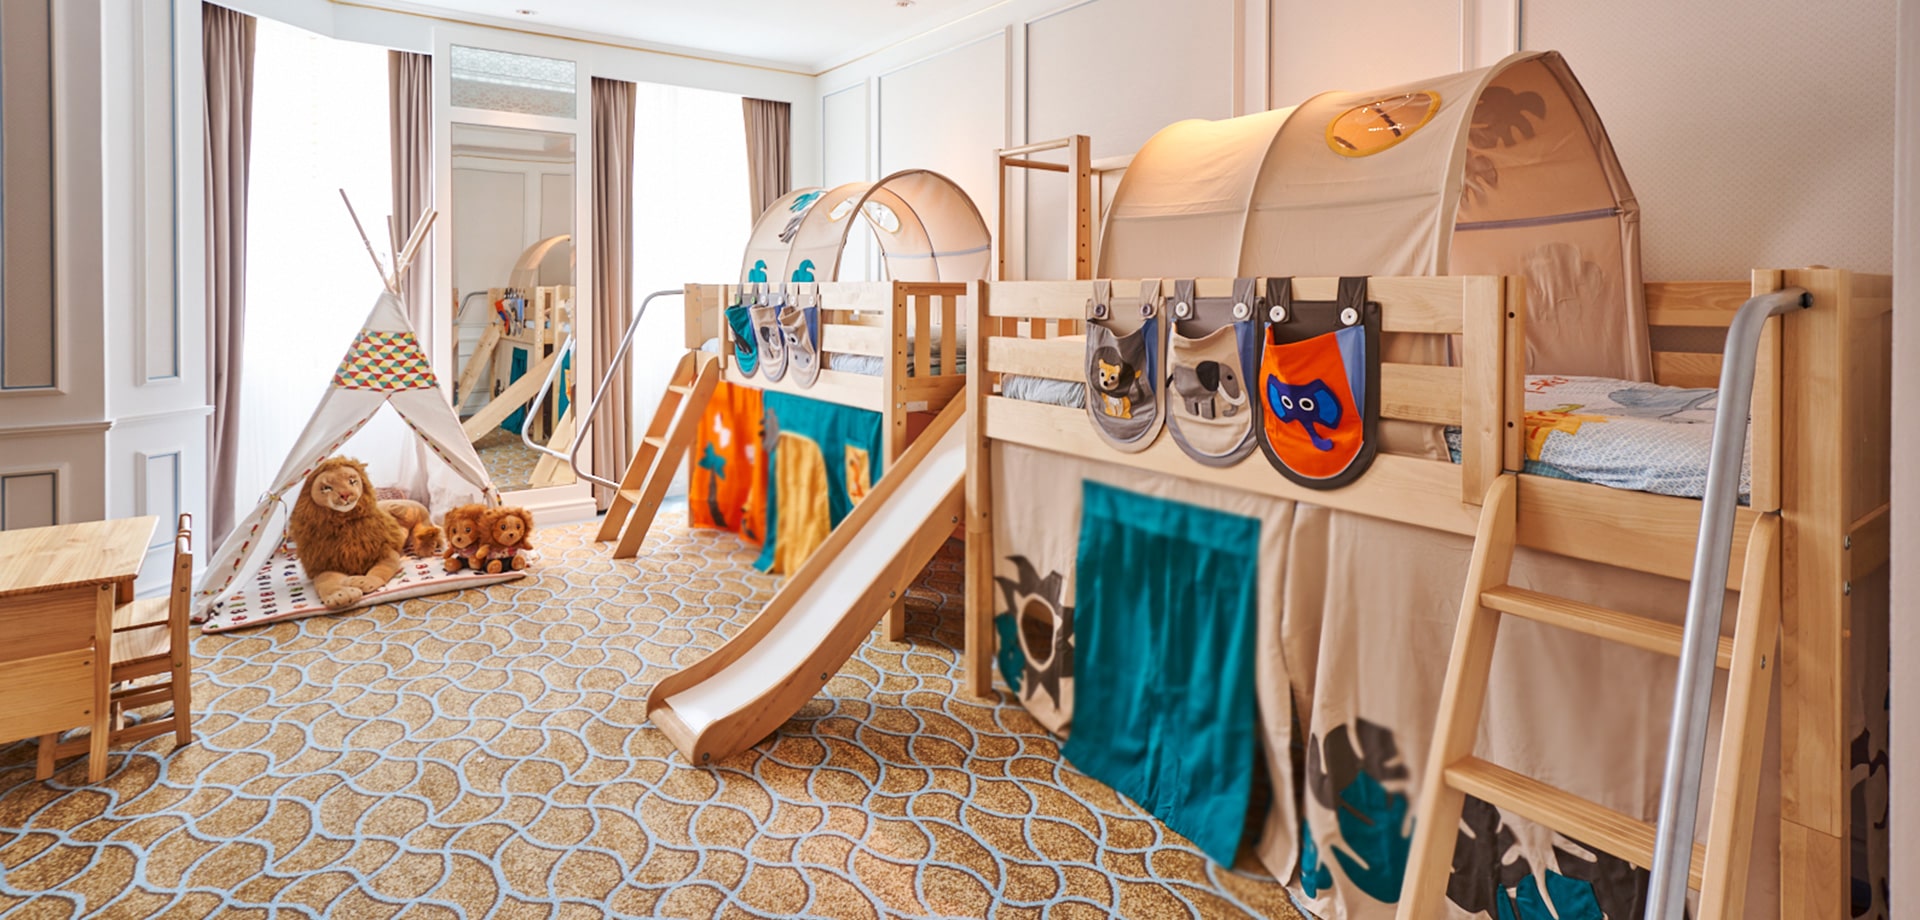 Hotel suites in Singapore - King's Suite Kids Theme at InterContinental Hotel